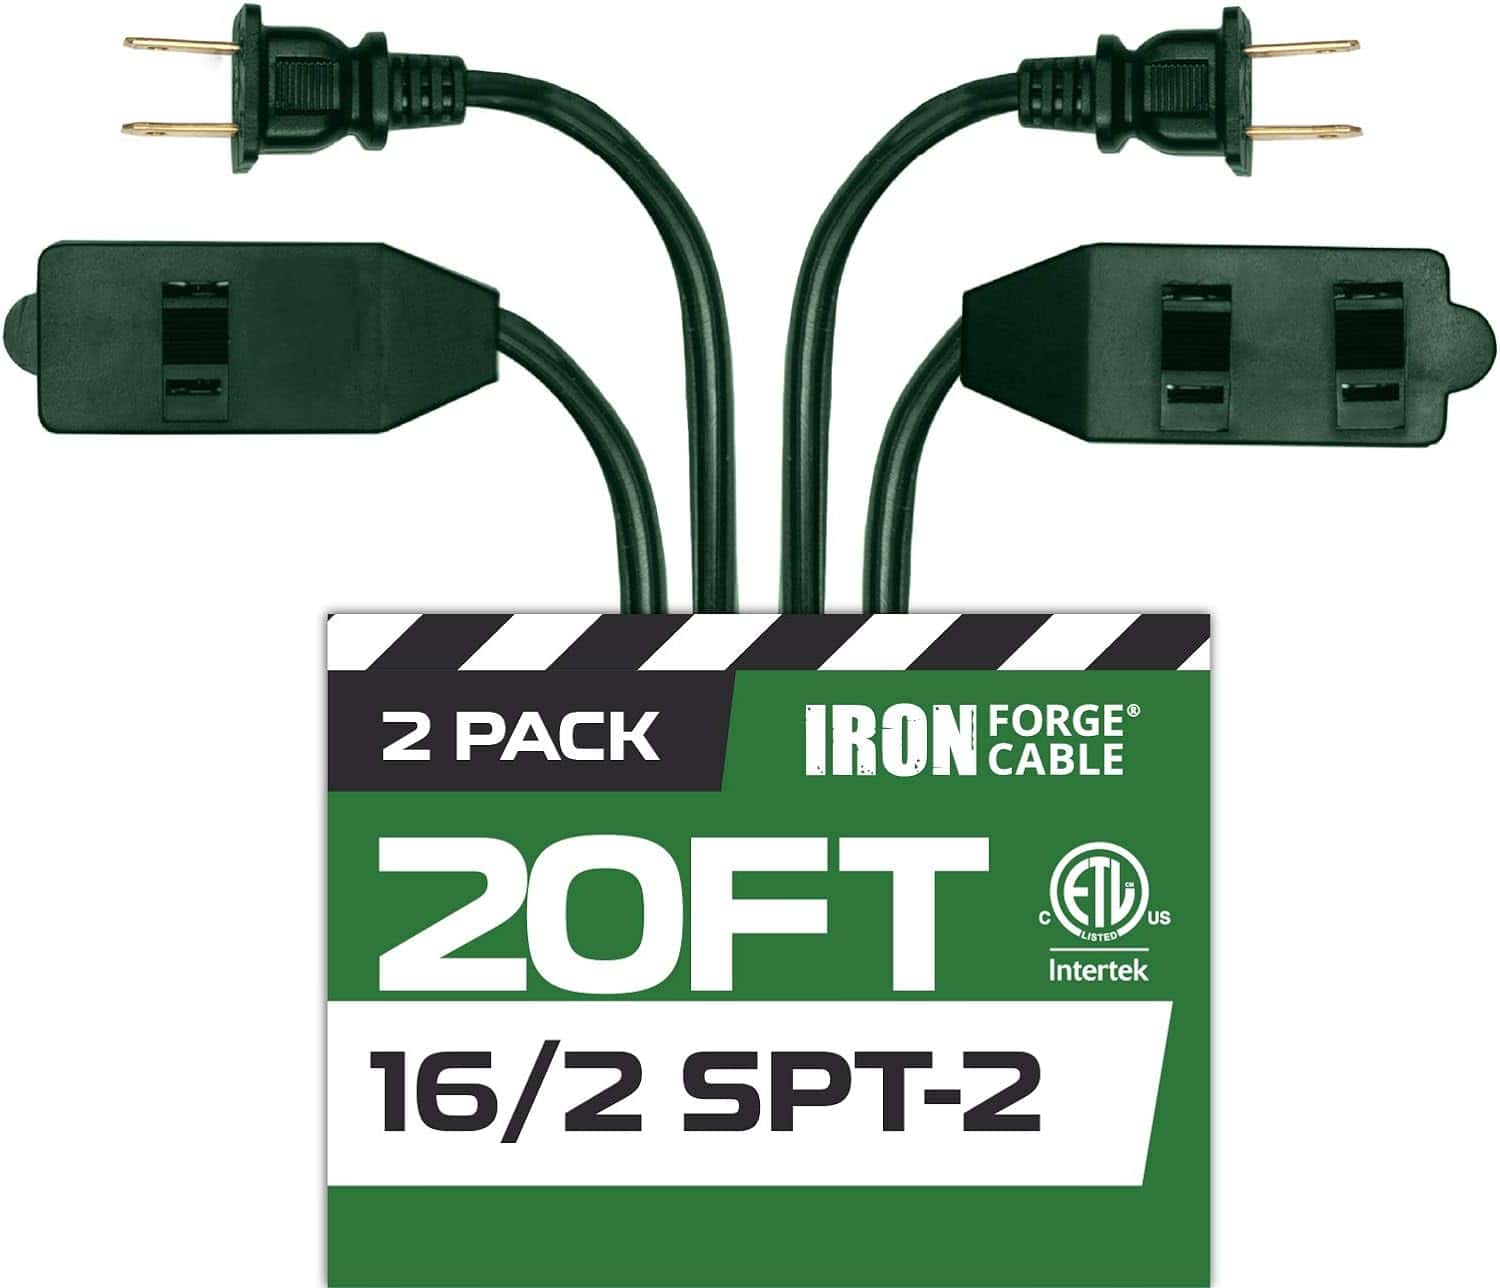 Iron-Forge-Cable-20-Ft-Green-Extension-Cord-with-3-Outlets-16-2-Indoor-Extension-Cord-with-Multiple-Outlets-13-AMP-2-Prong-Electrical-Cable-for-Home-Office-Household-Appliances